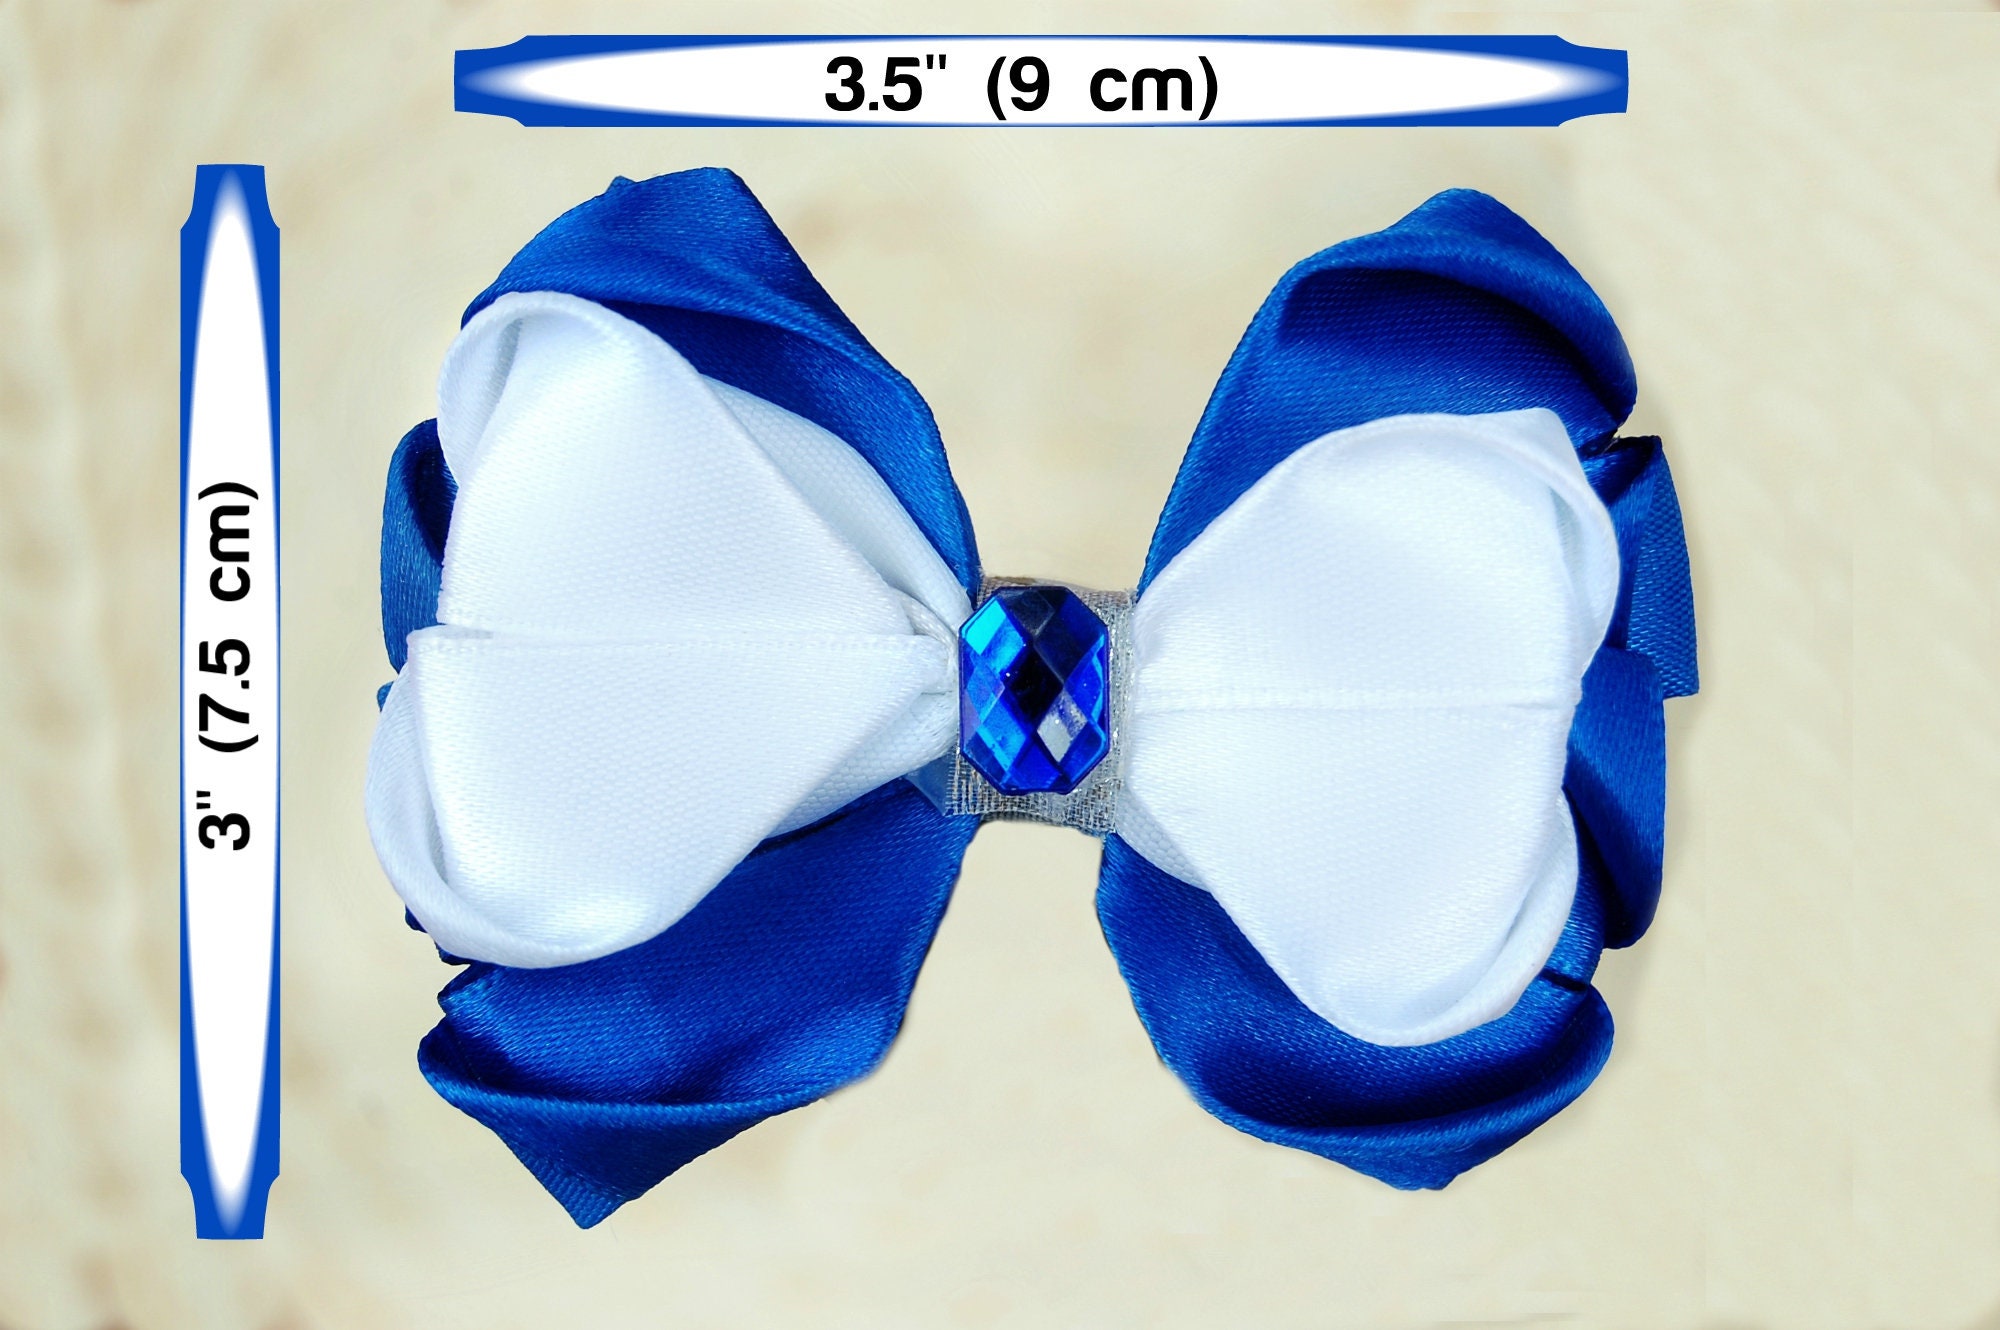 2. Big Royal Blue Hair Bow for Girls - wide 5